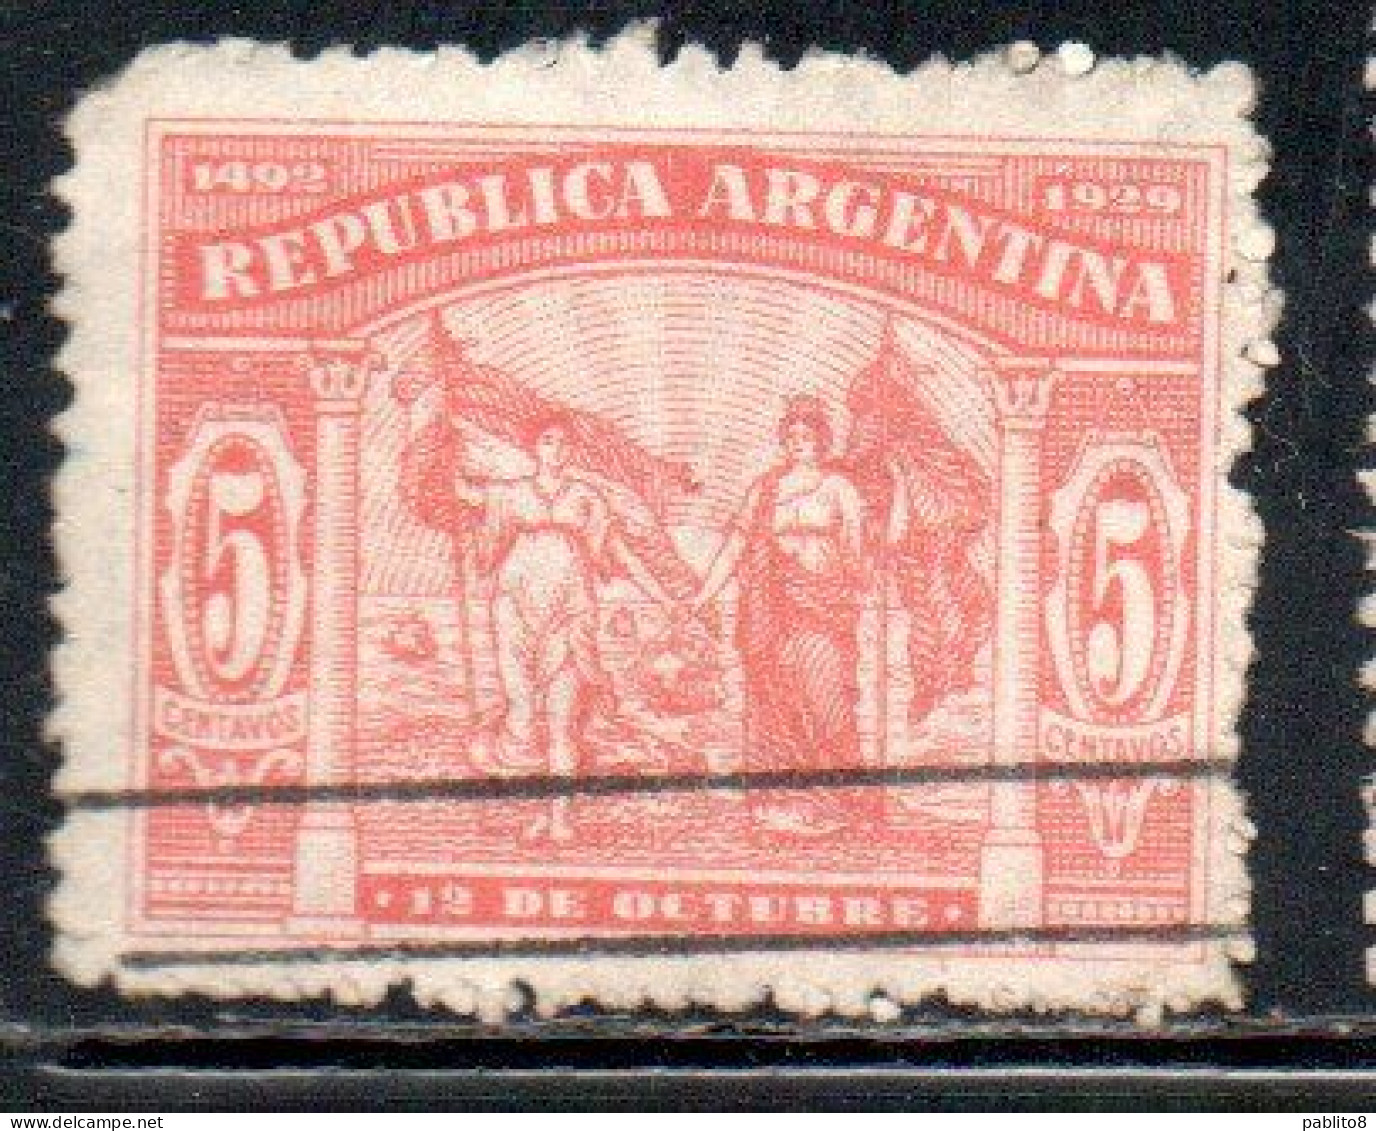 ARGENTINA 1929 DISCOVERY OF AMERICA BY COLUMBUS SPAIN AND ARGENTINA 5c USED USADO OBLITERE' - Gebraucht